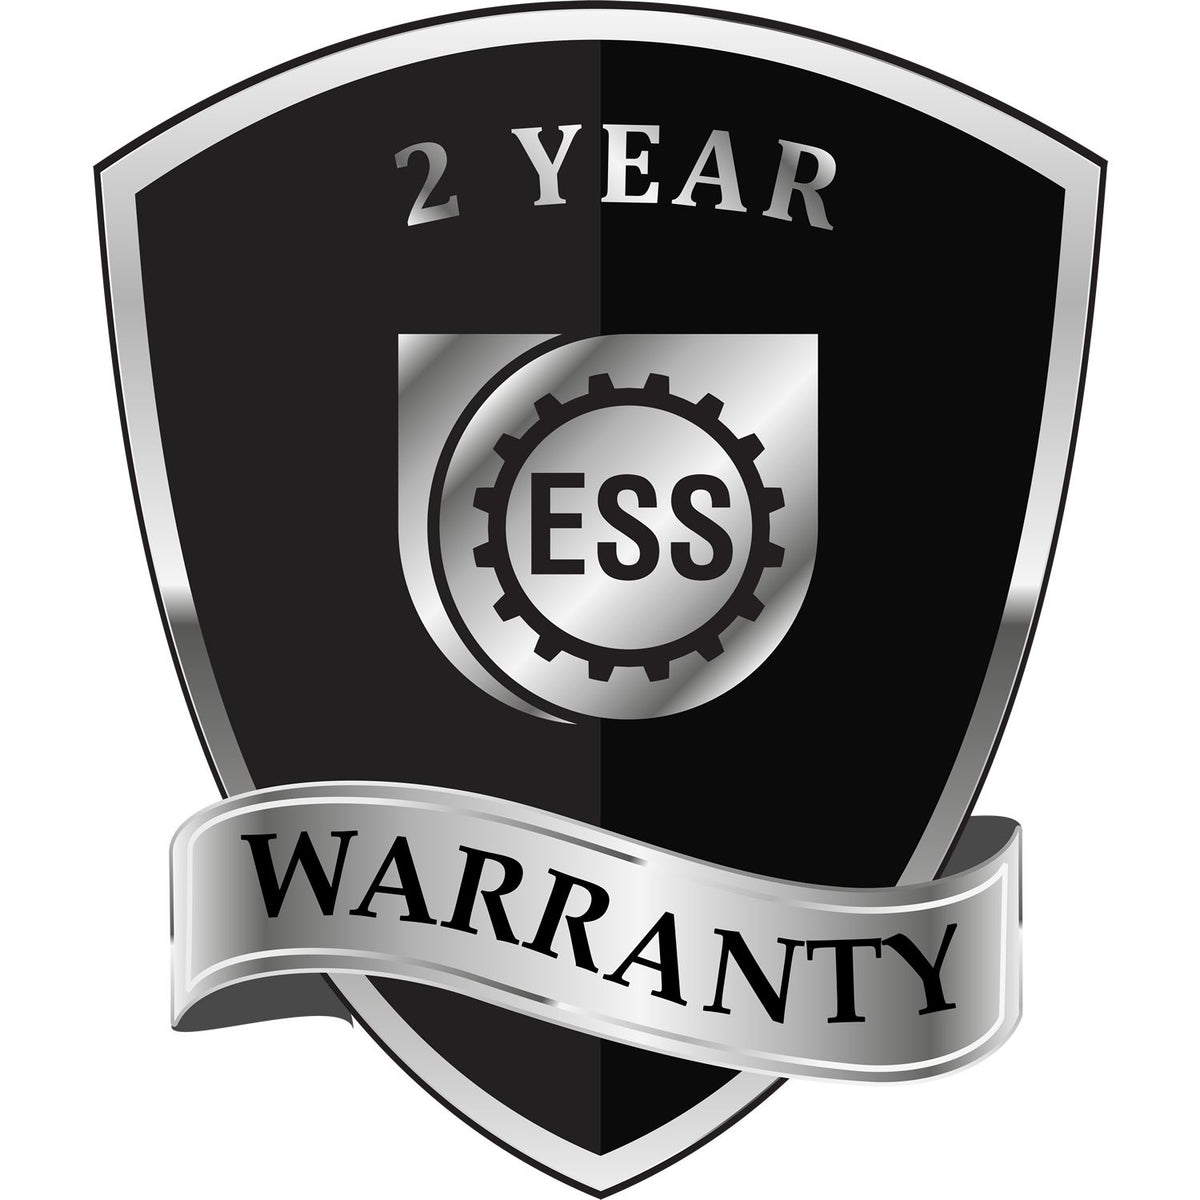 A black and silver badge or emblem showing warranty information for the Hybrid Kentucky Architect Seal